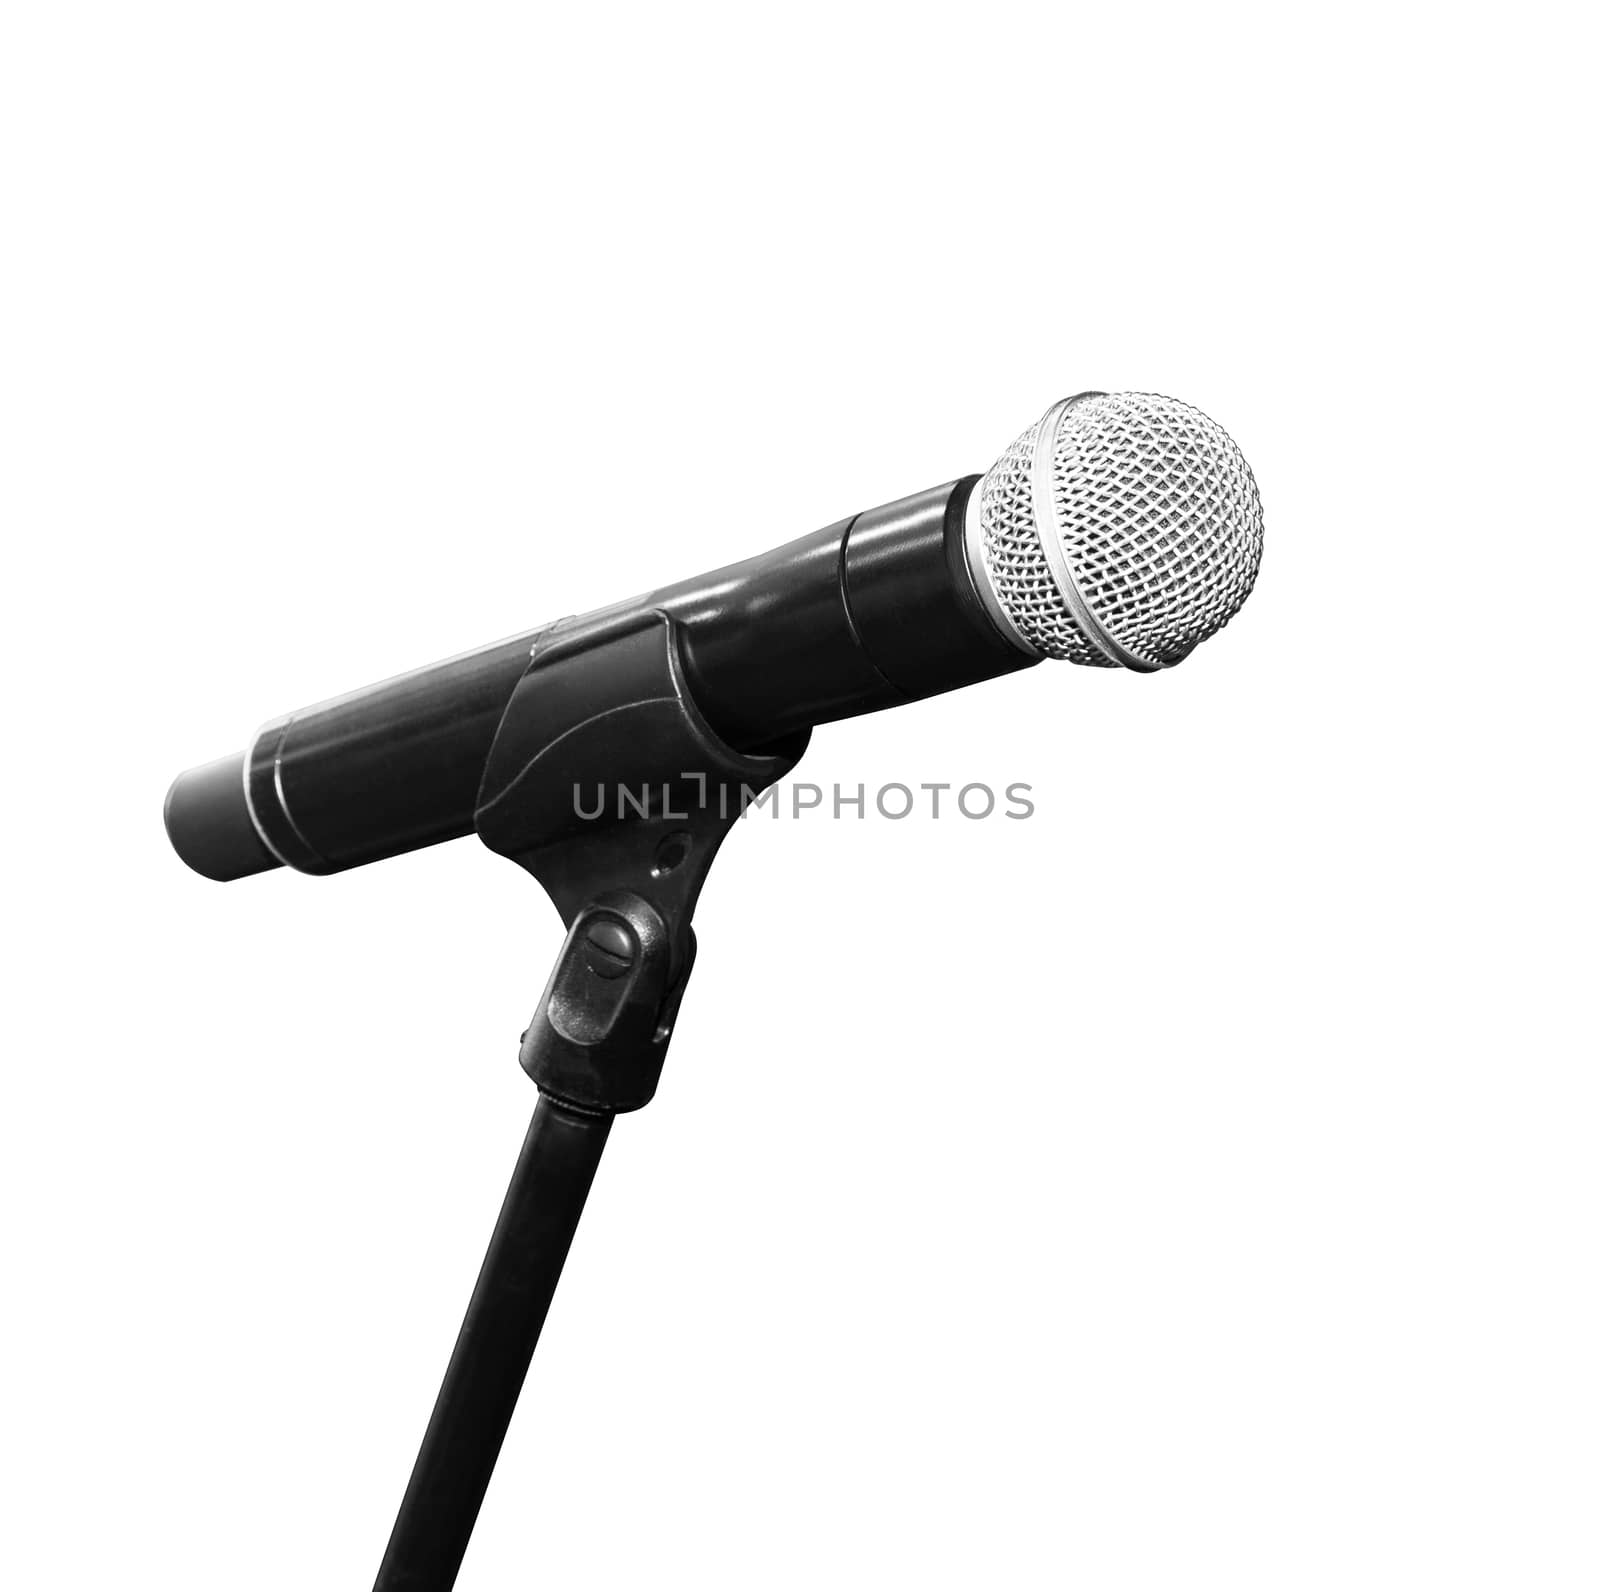 Microphone on stand isolated on white background by SlayCer